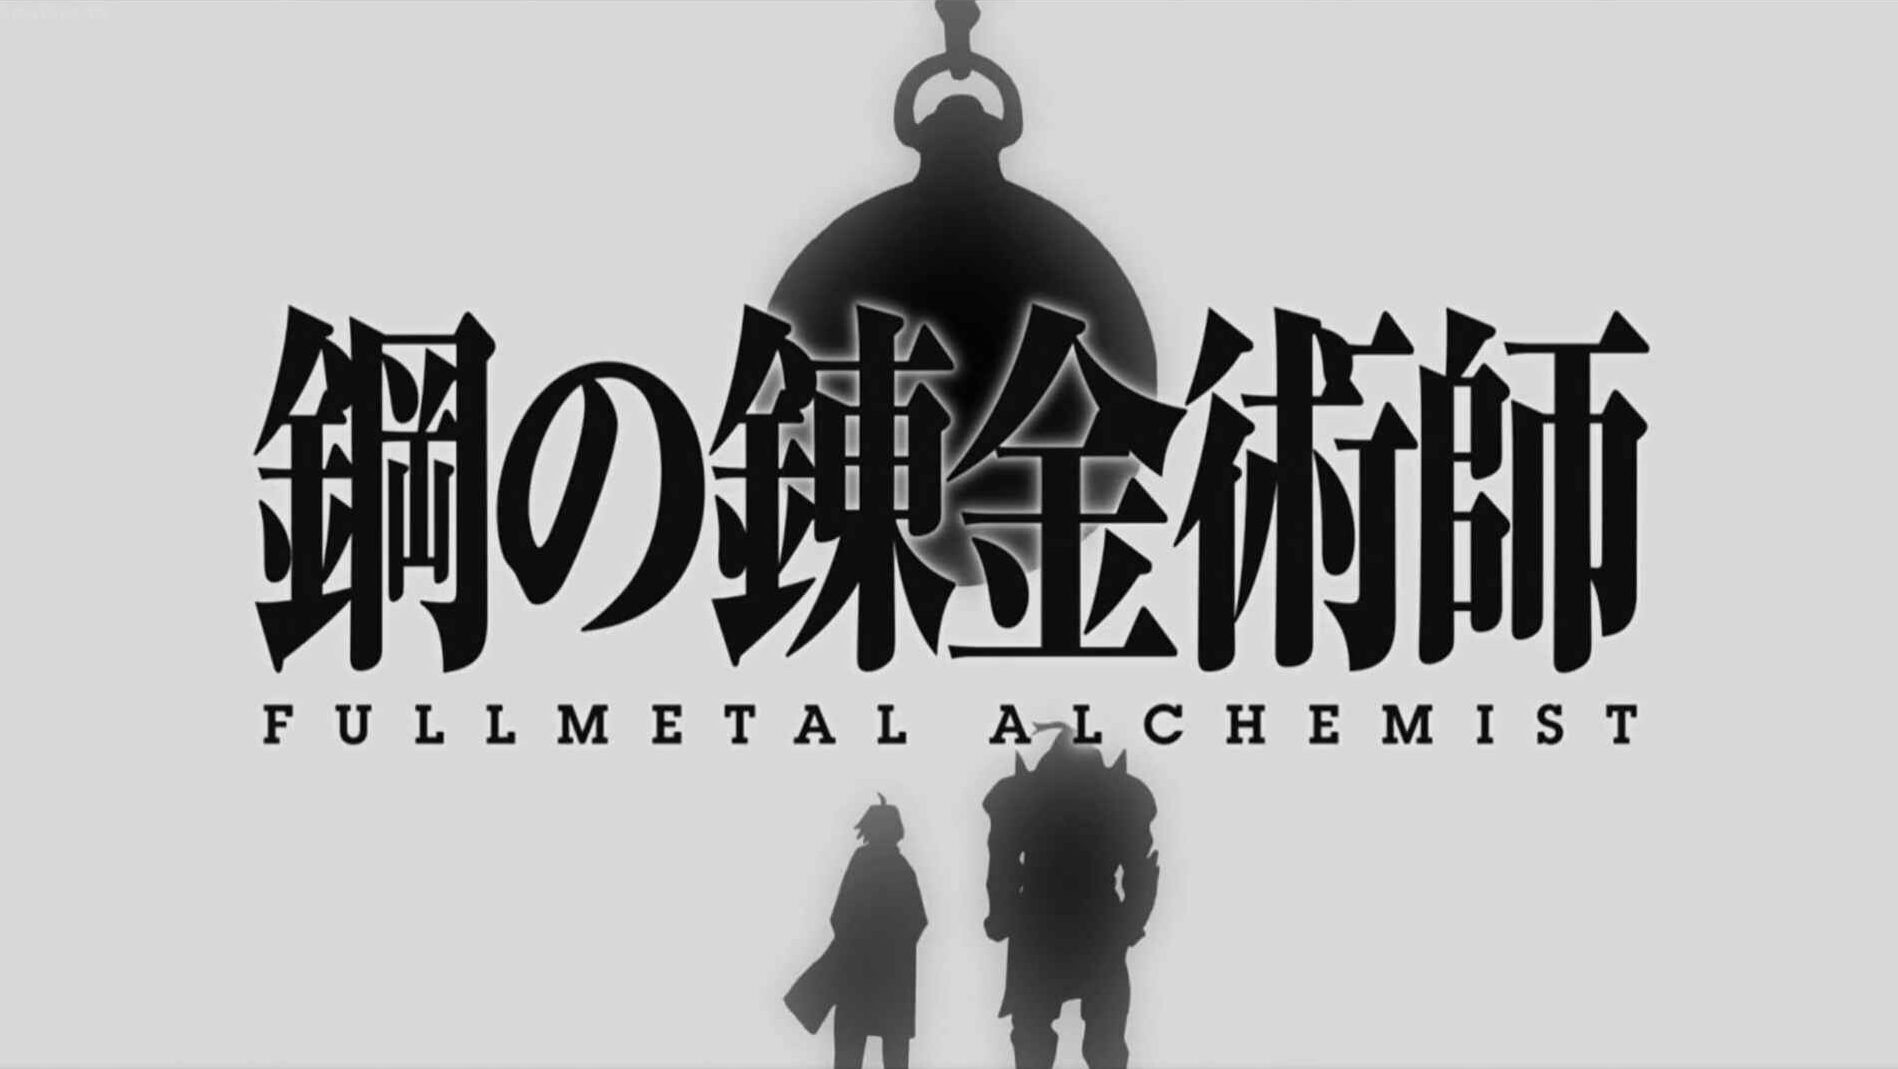  Fullmetal Alchemist: Brotherhood stands as a pinnacle of excellence in the anime world 